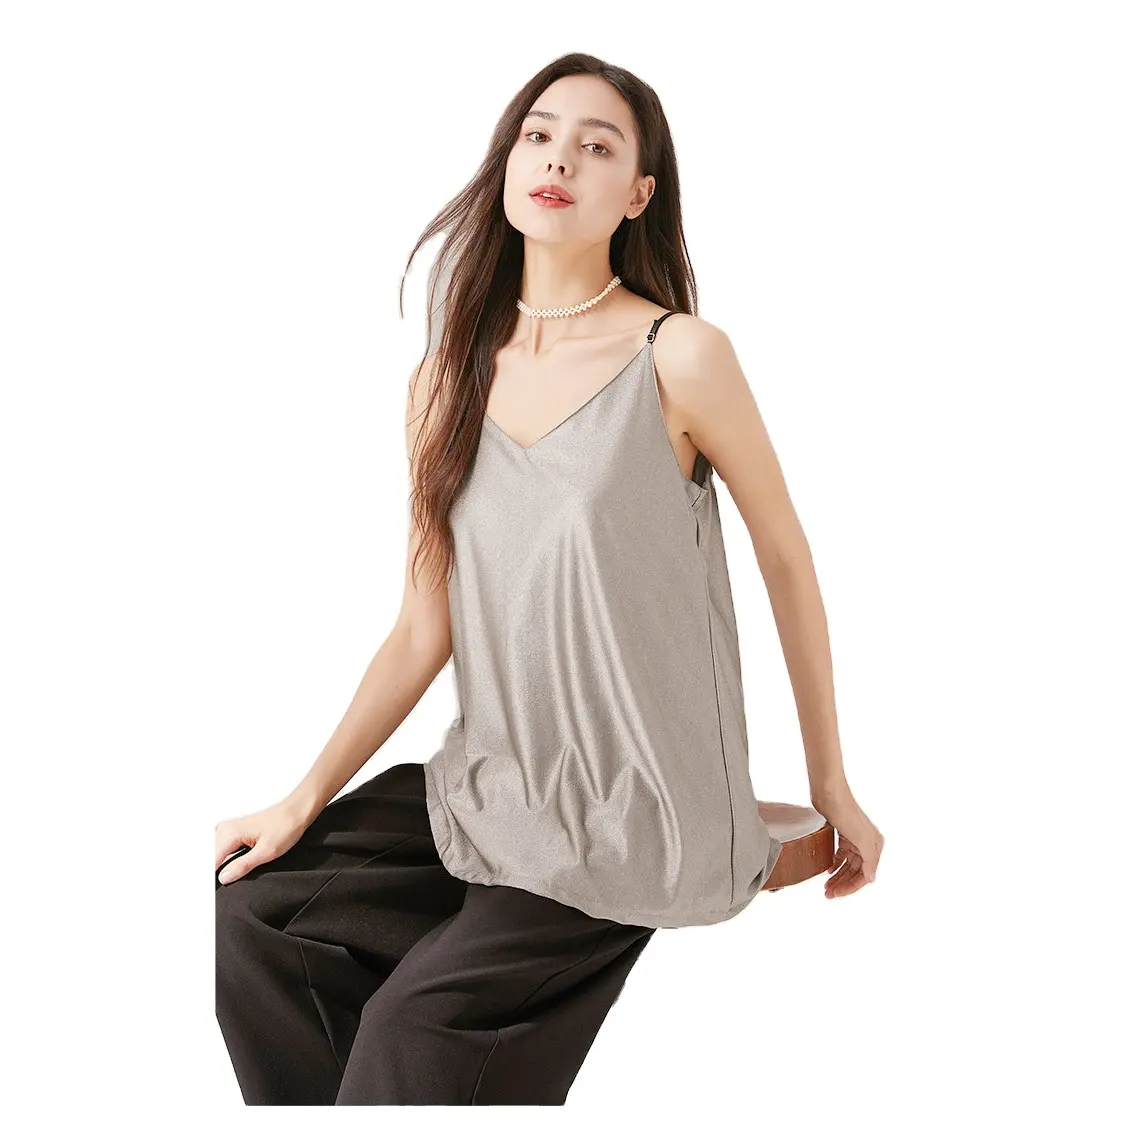 Computer Anti-radiation Clothes Silver Fiber Double-layer Large Size Four Seasons Brand Anti-radiation Maternity Clothes